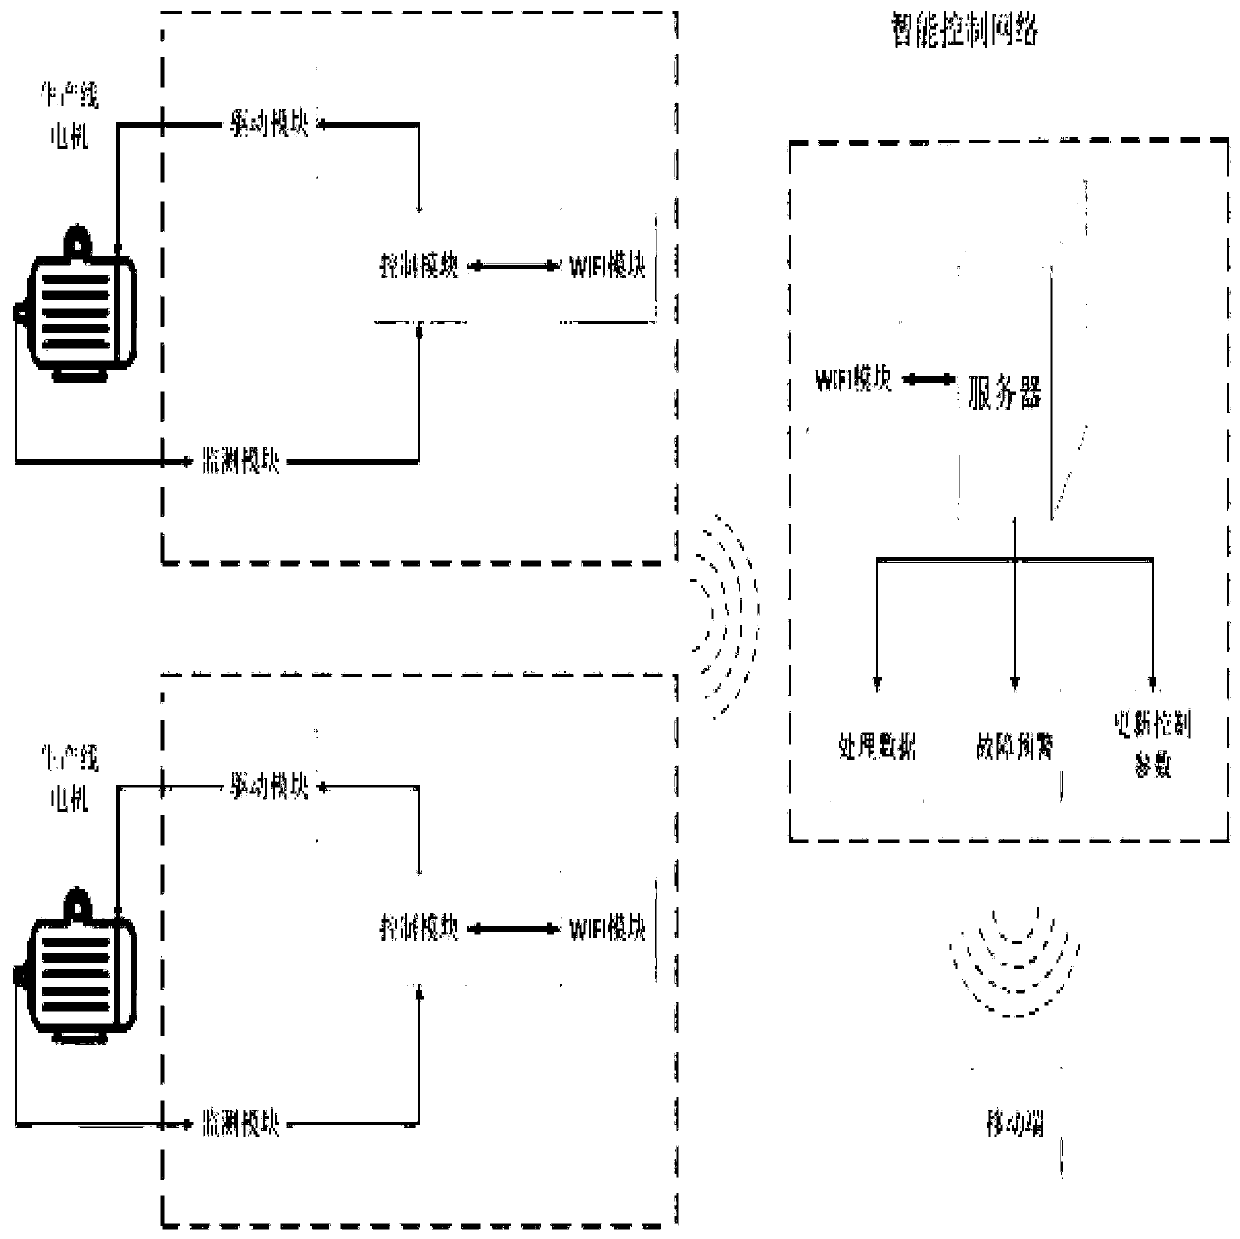 Switched reluctance motor intelligent control system based on WIFI